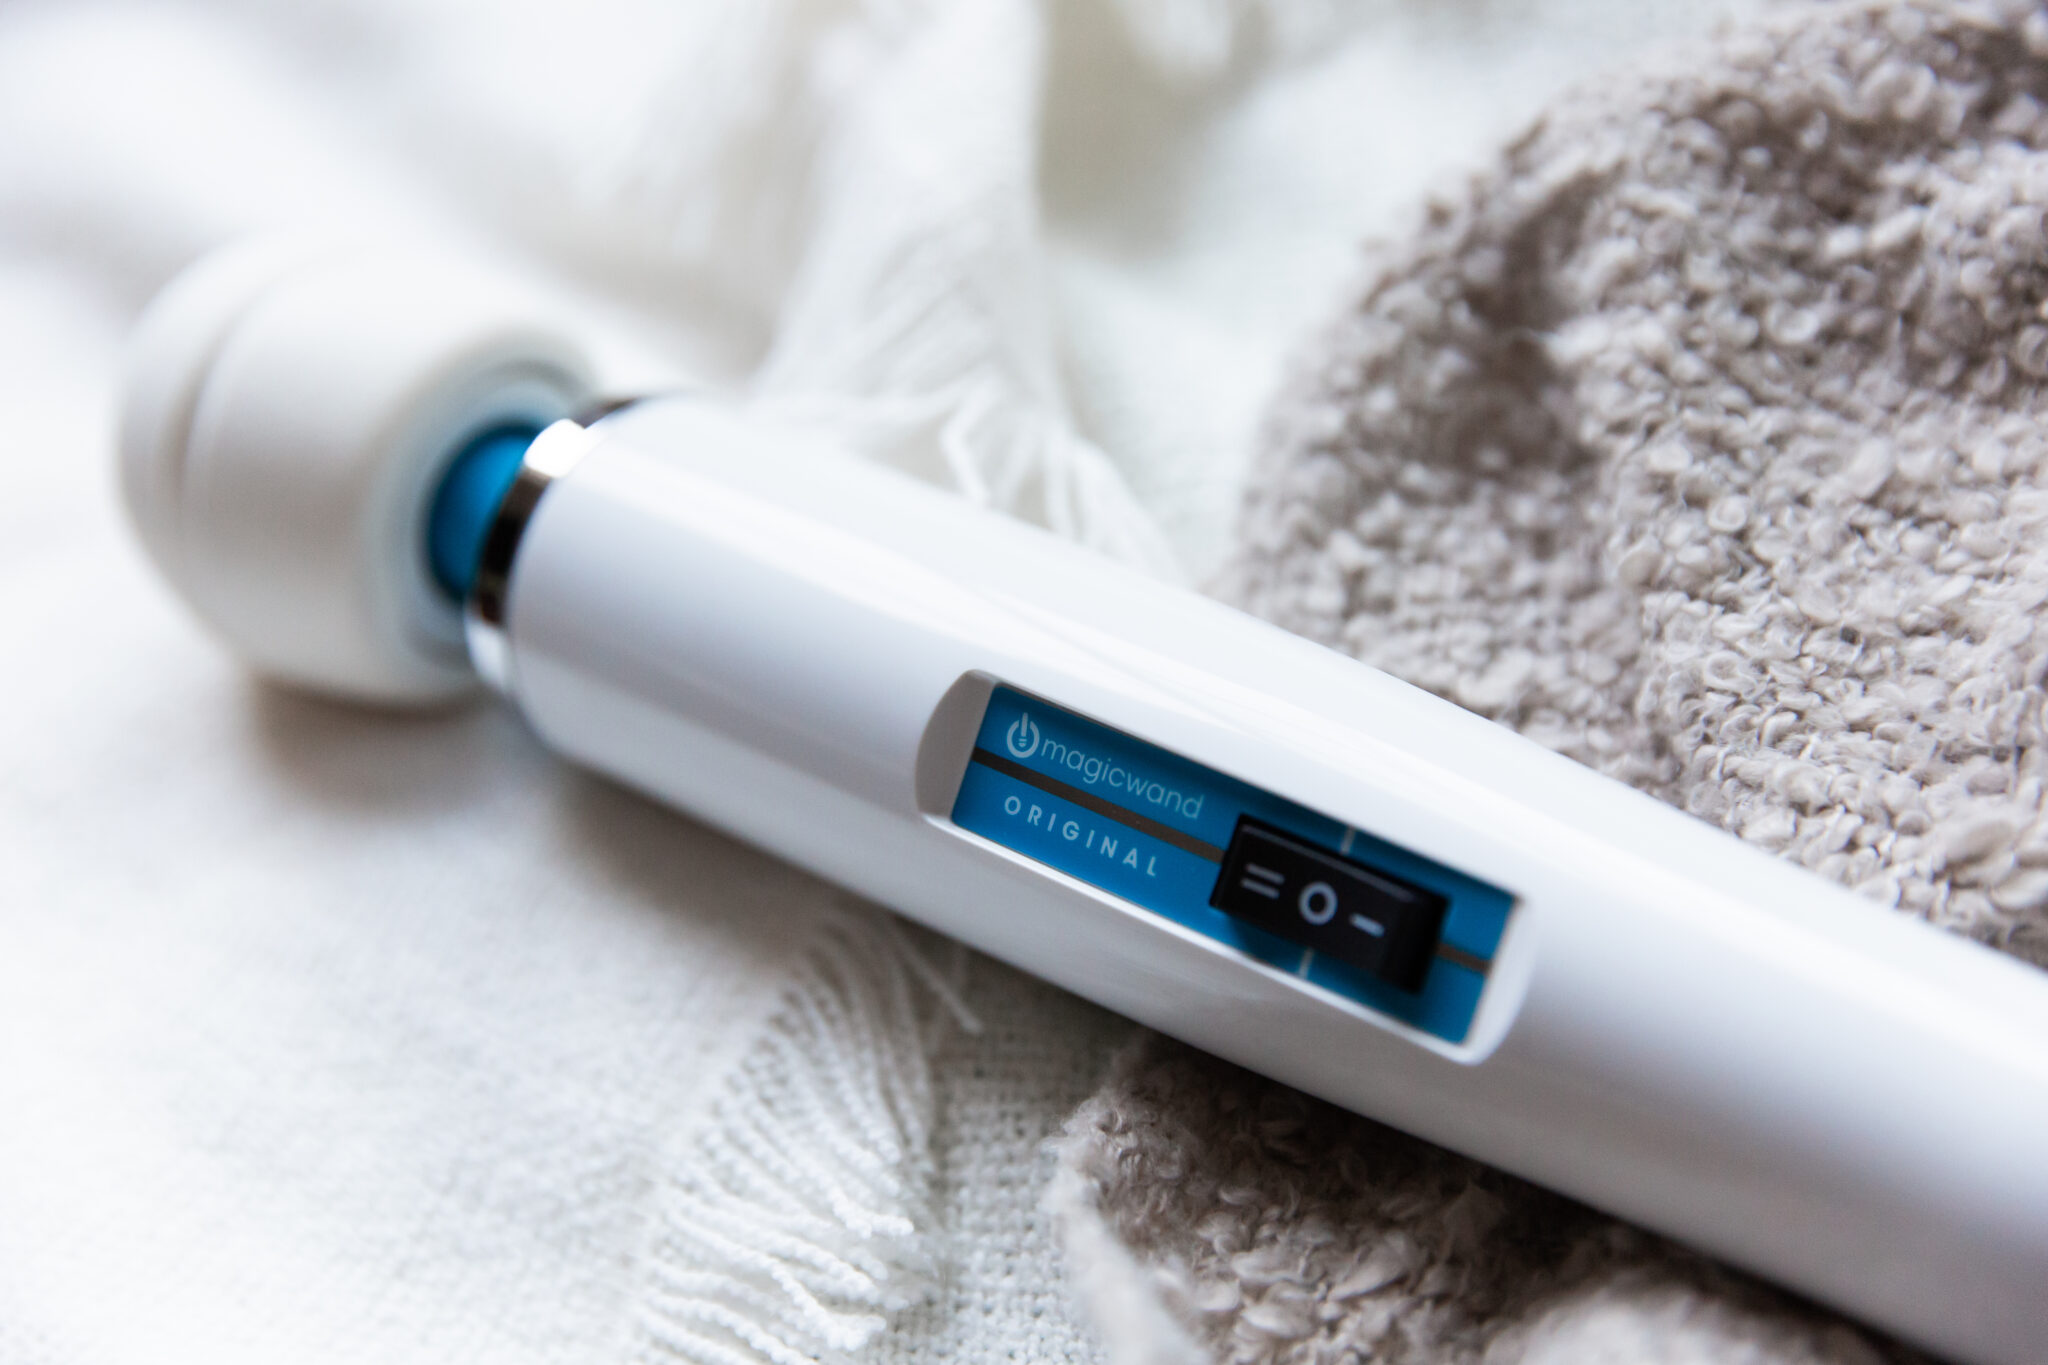 Image of the white-bodied Hitachi Magic Wand featuring its control switch and blue accents.